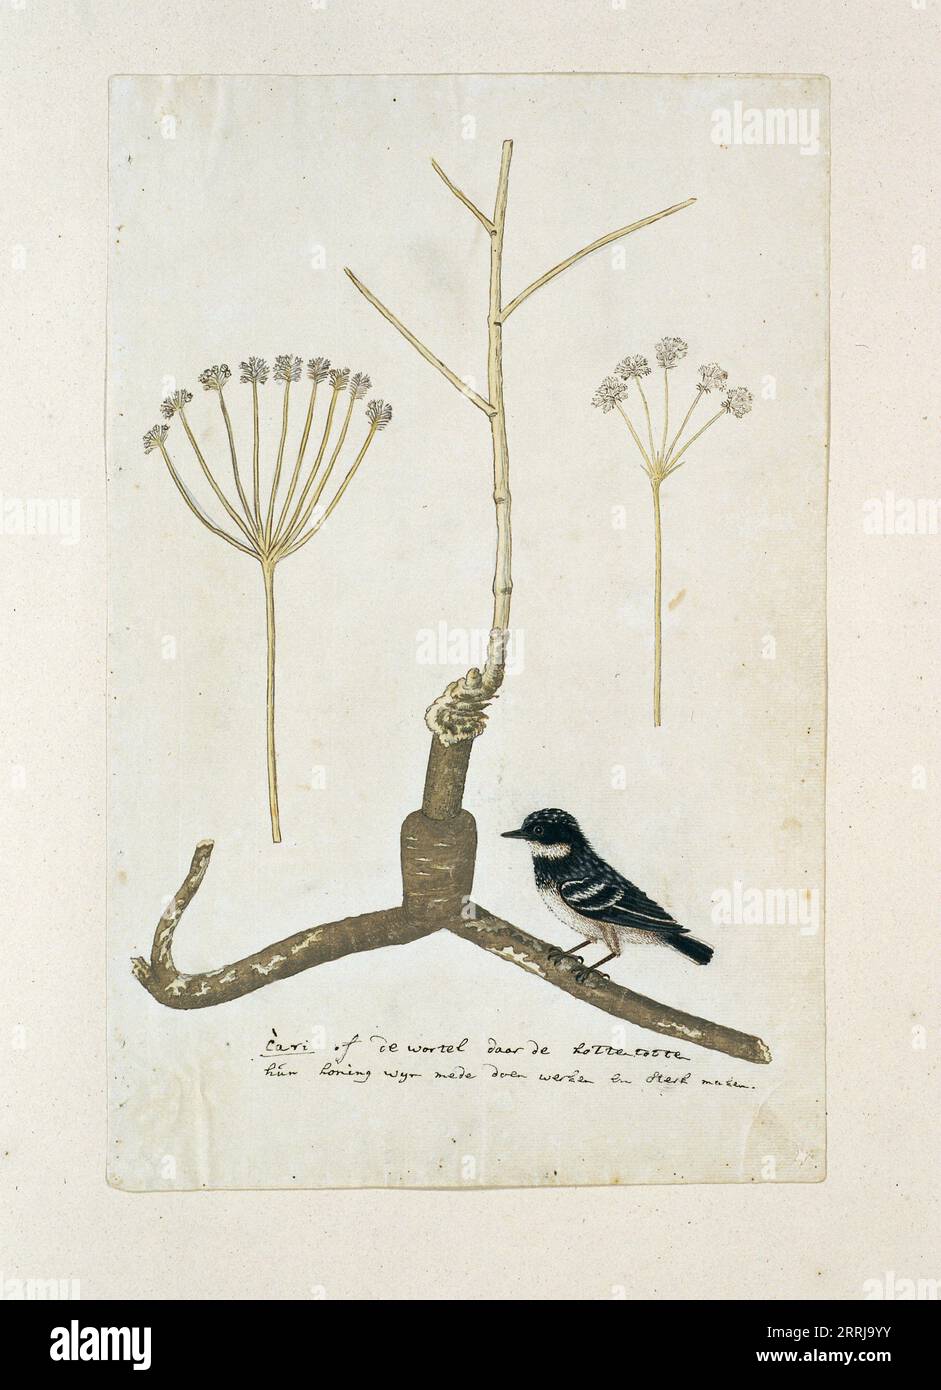 Apiacea or Umbeliffera, 1777-1786. Apiaceae (Umbelliferea), root with a bird and two detailed sketches of the umbellate flower. The Khoikhoi people use the root to strengthen their wine. Stock Photo